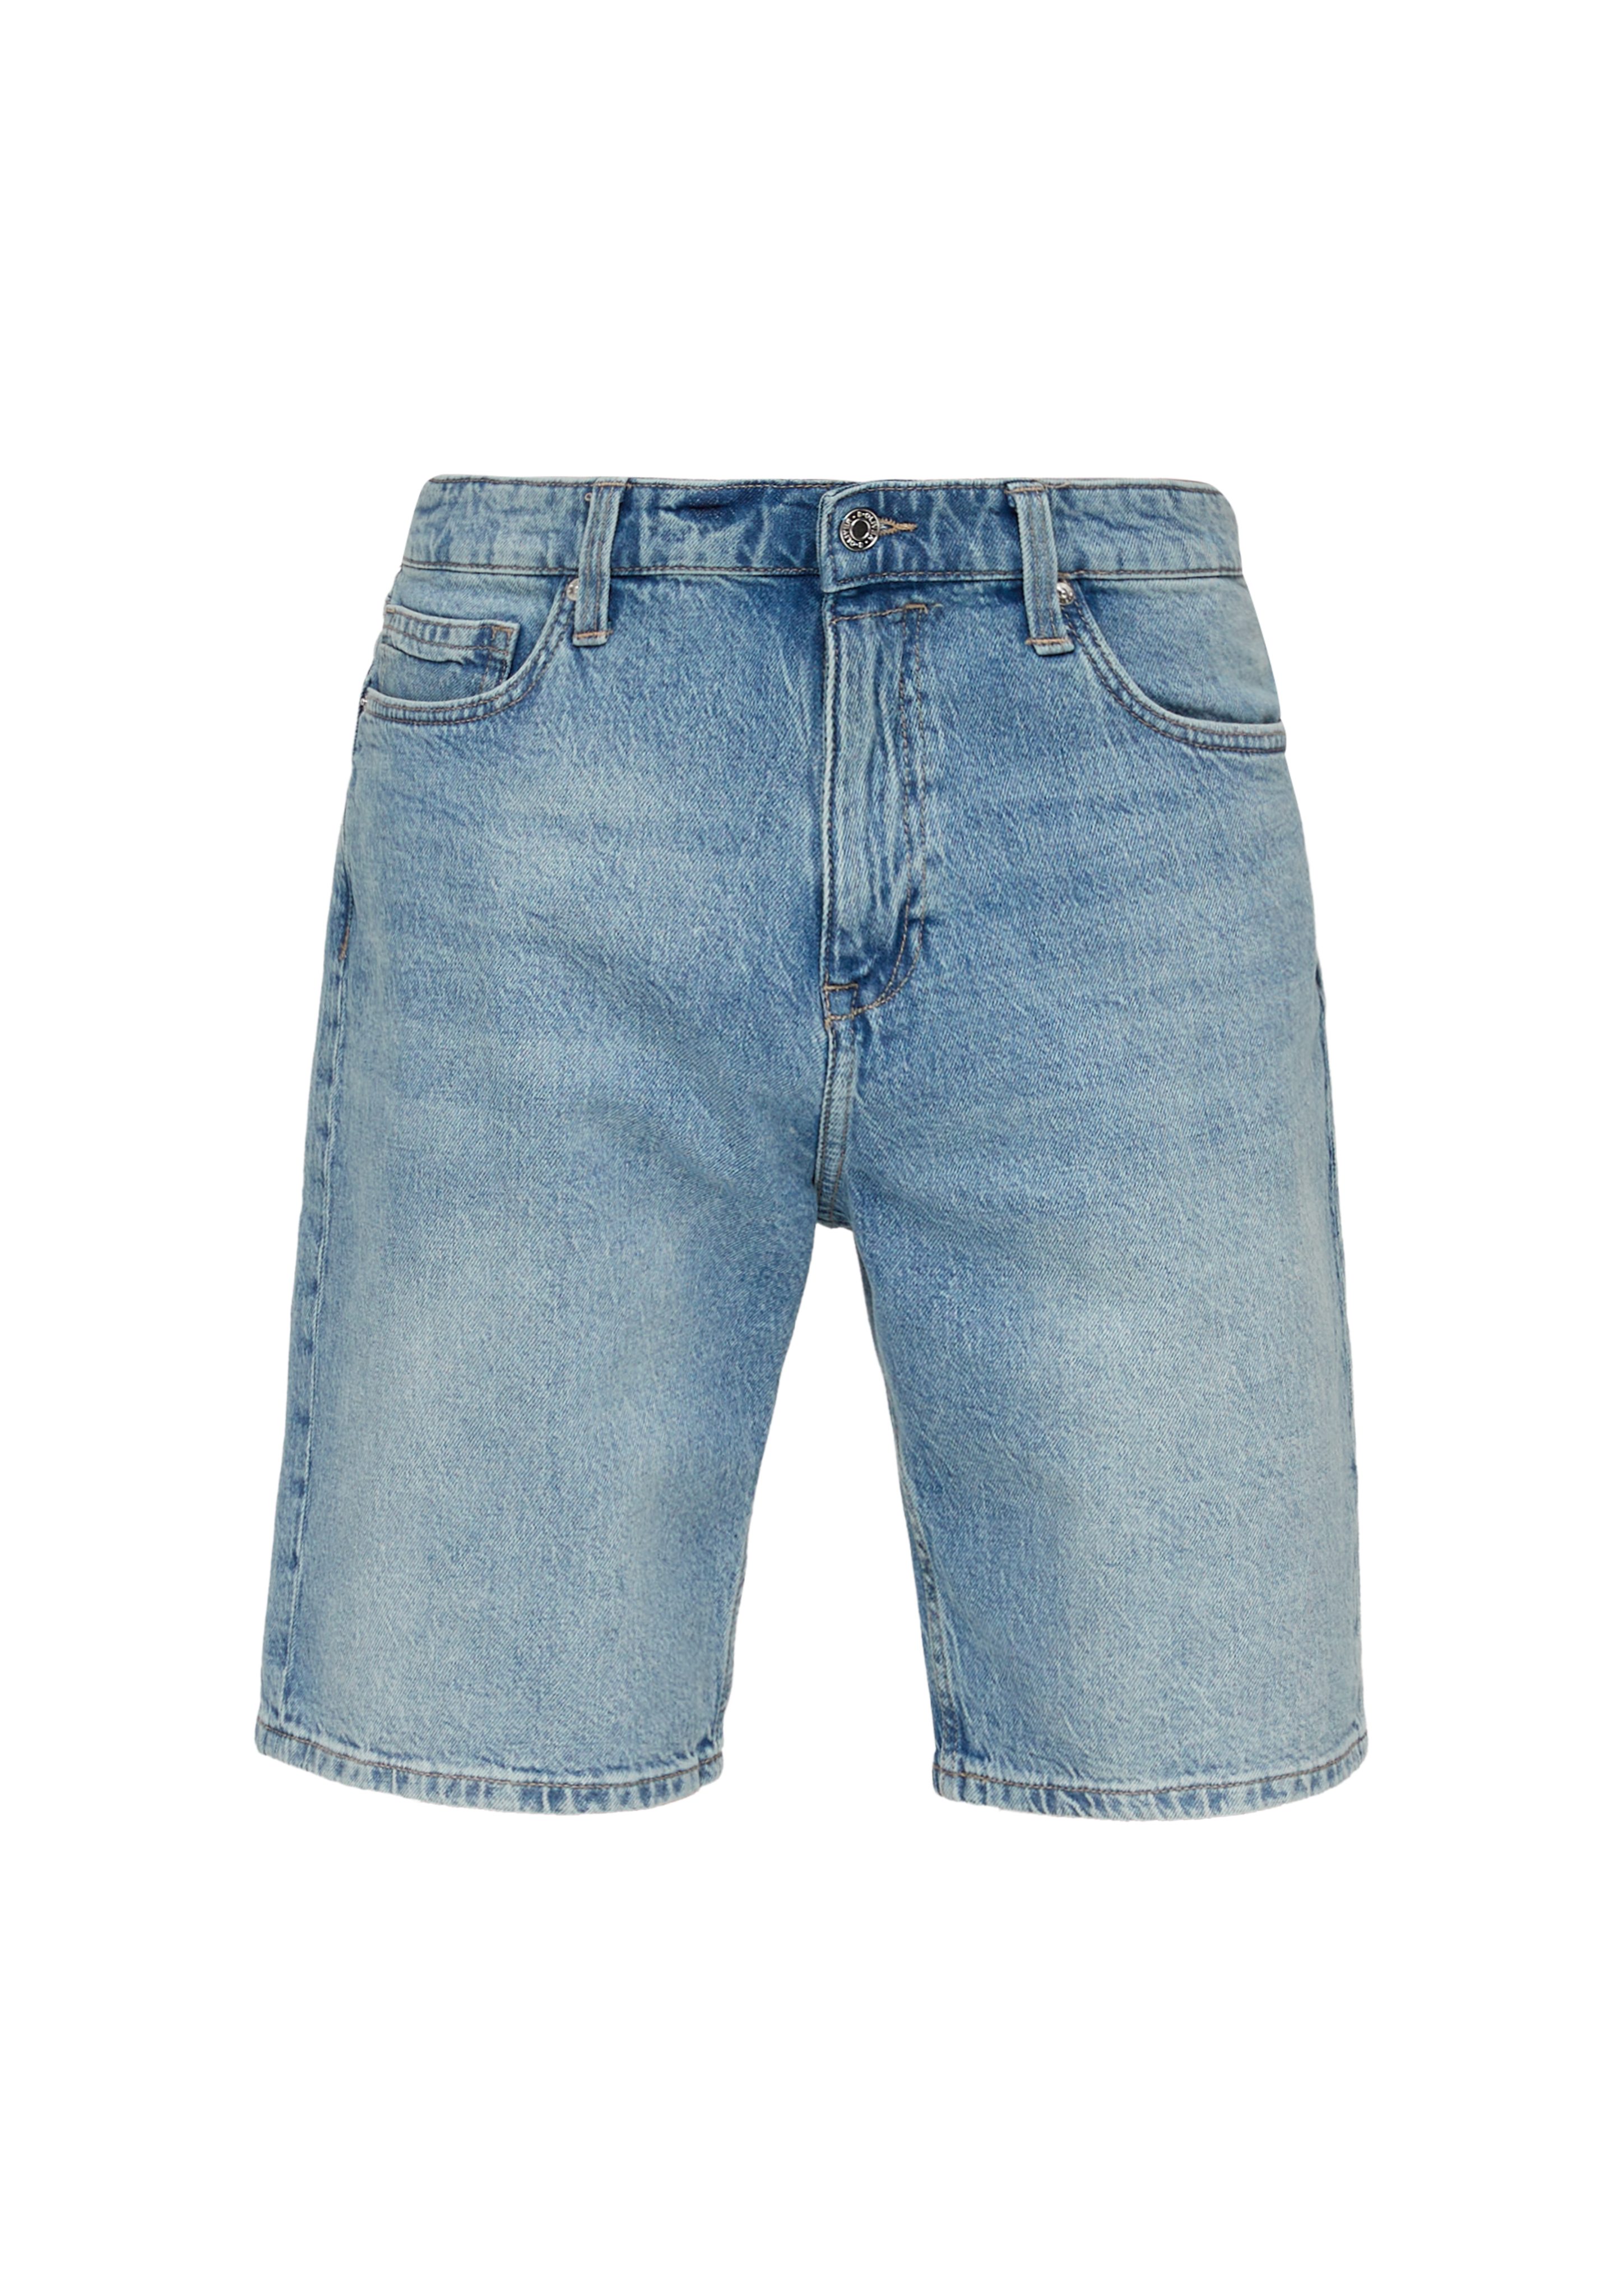 Regular Leg Rise / Jeansshorts Waschung Straight Fit / Jeans-Shorts / High s.Oliver